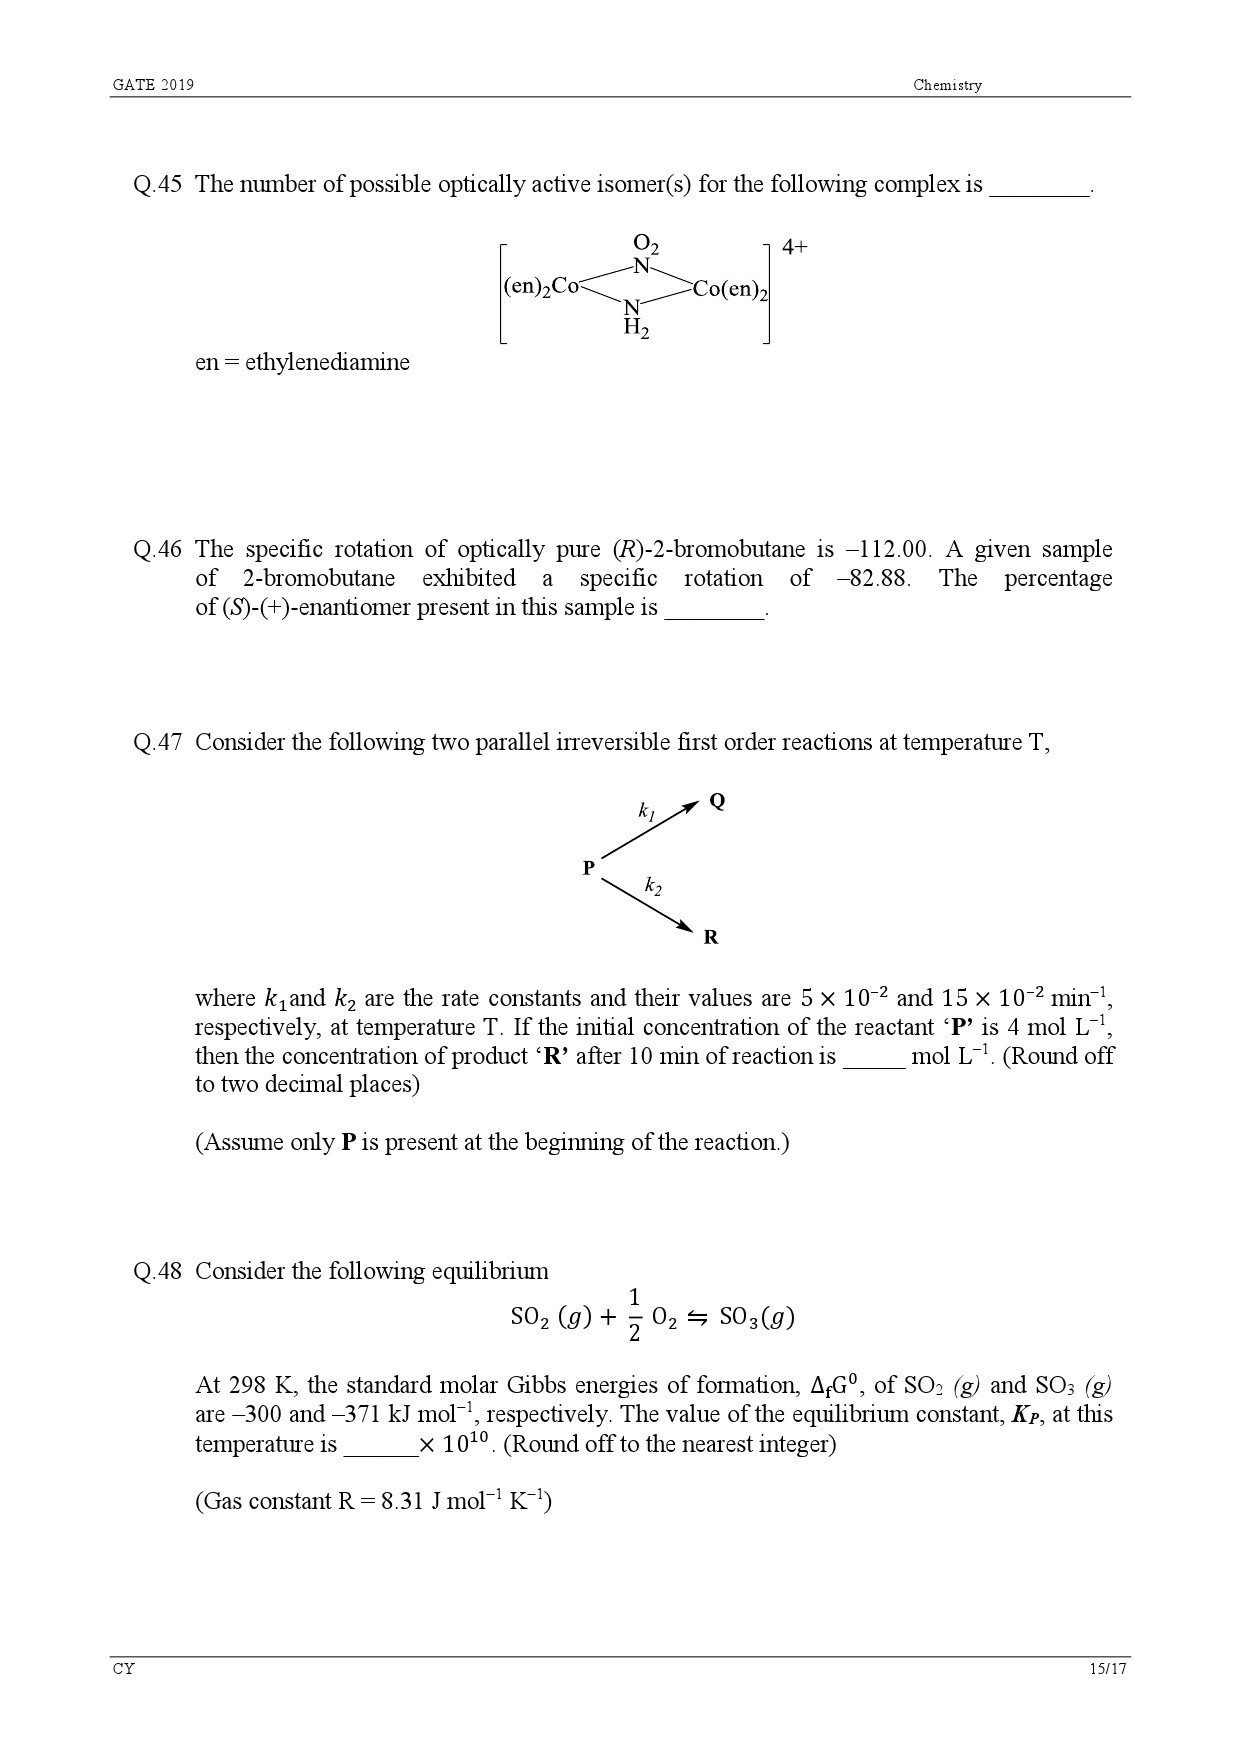 GATE Exam Question Paper 2019 Chemistry 18